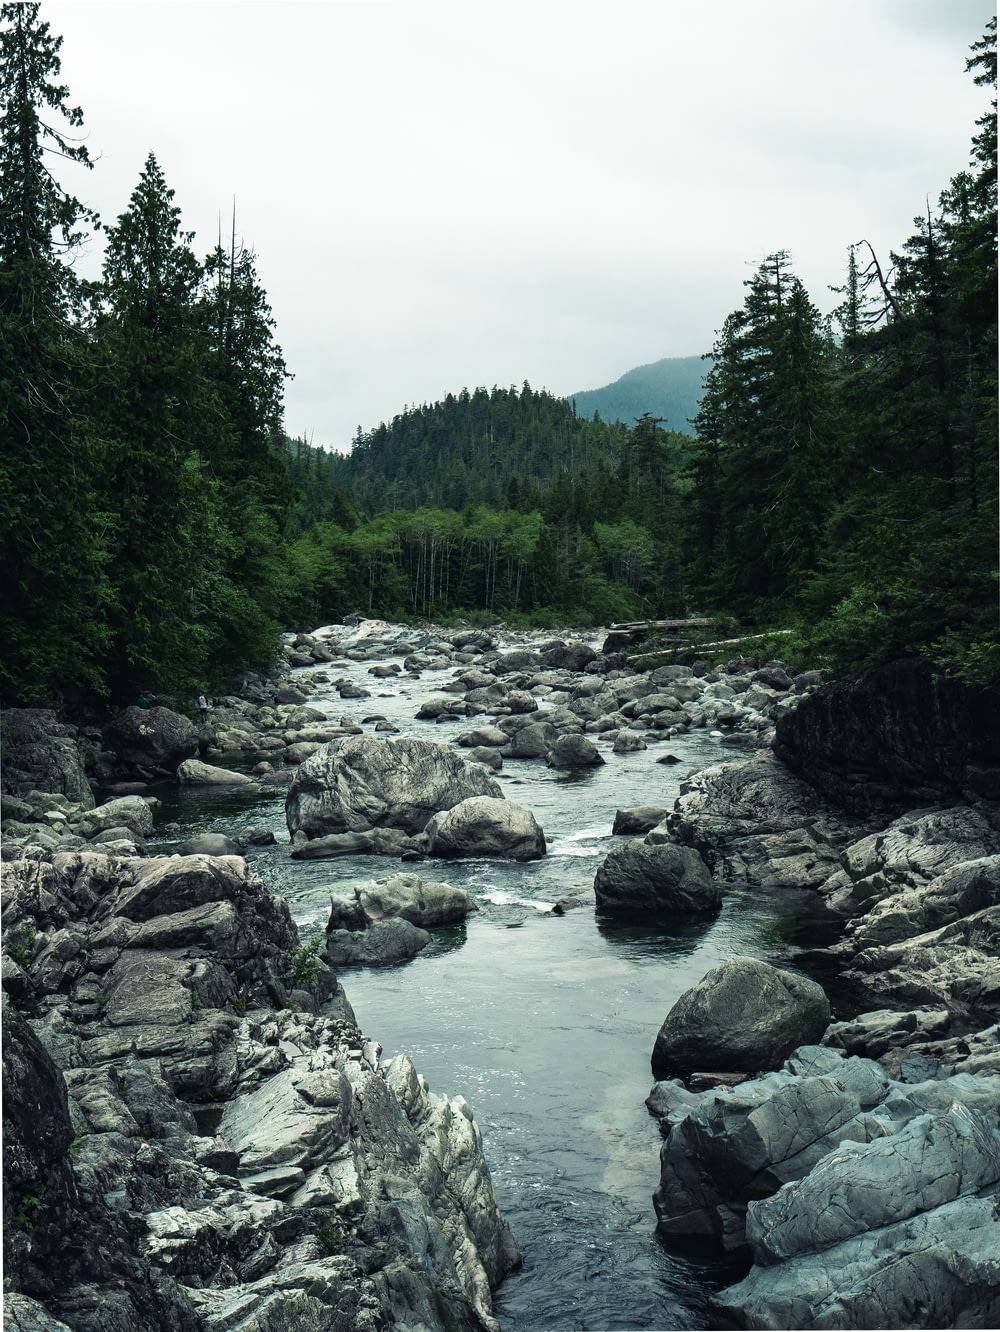 rocky river surrounded with trees